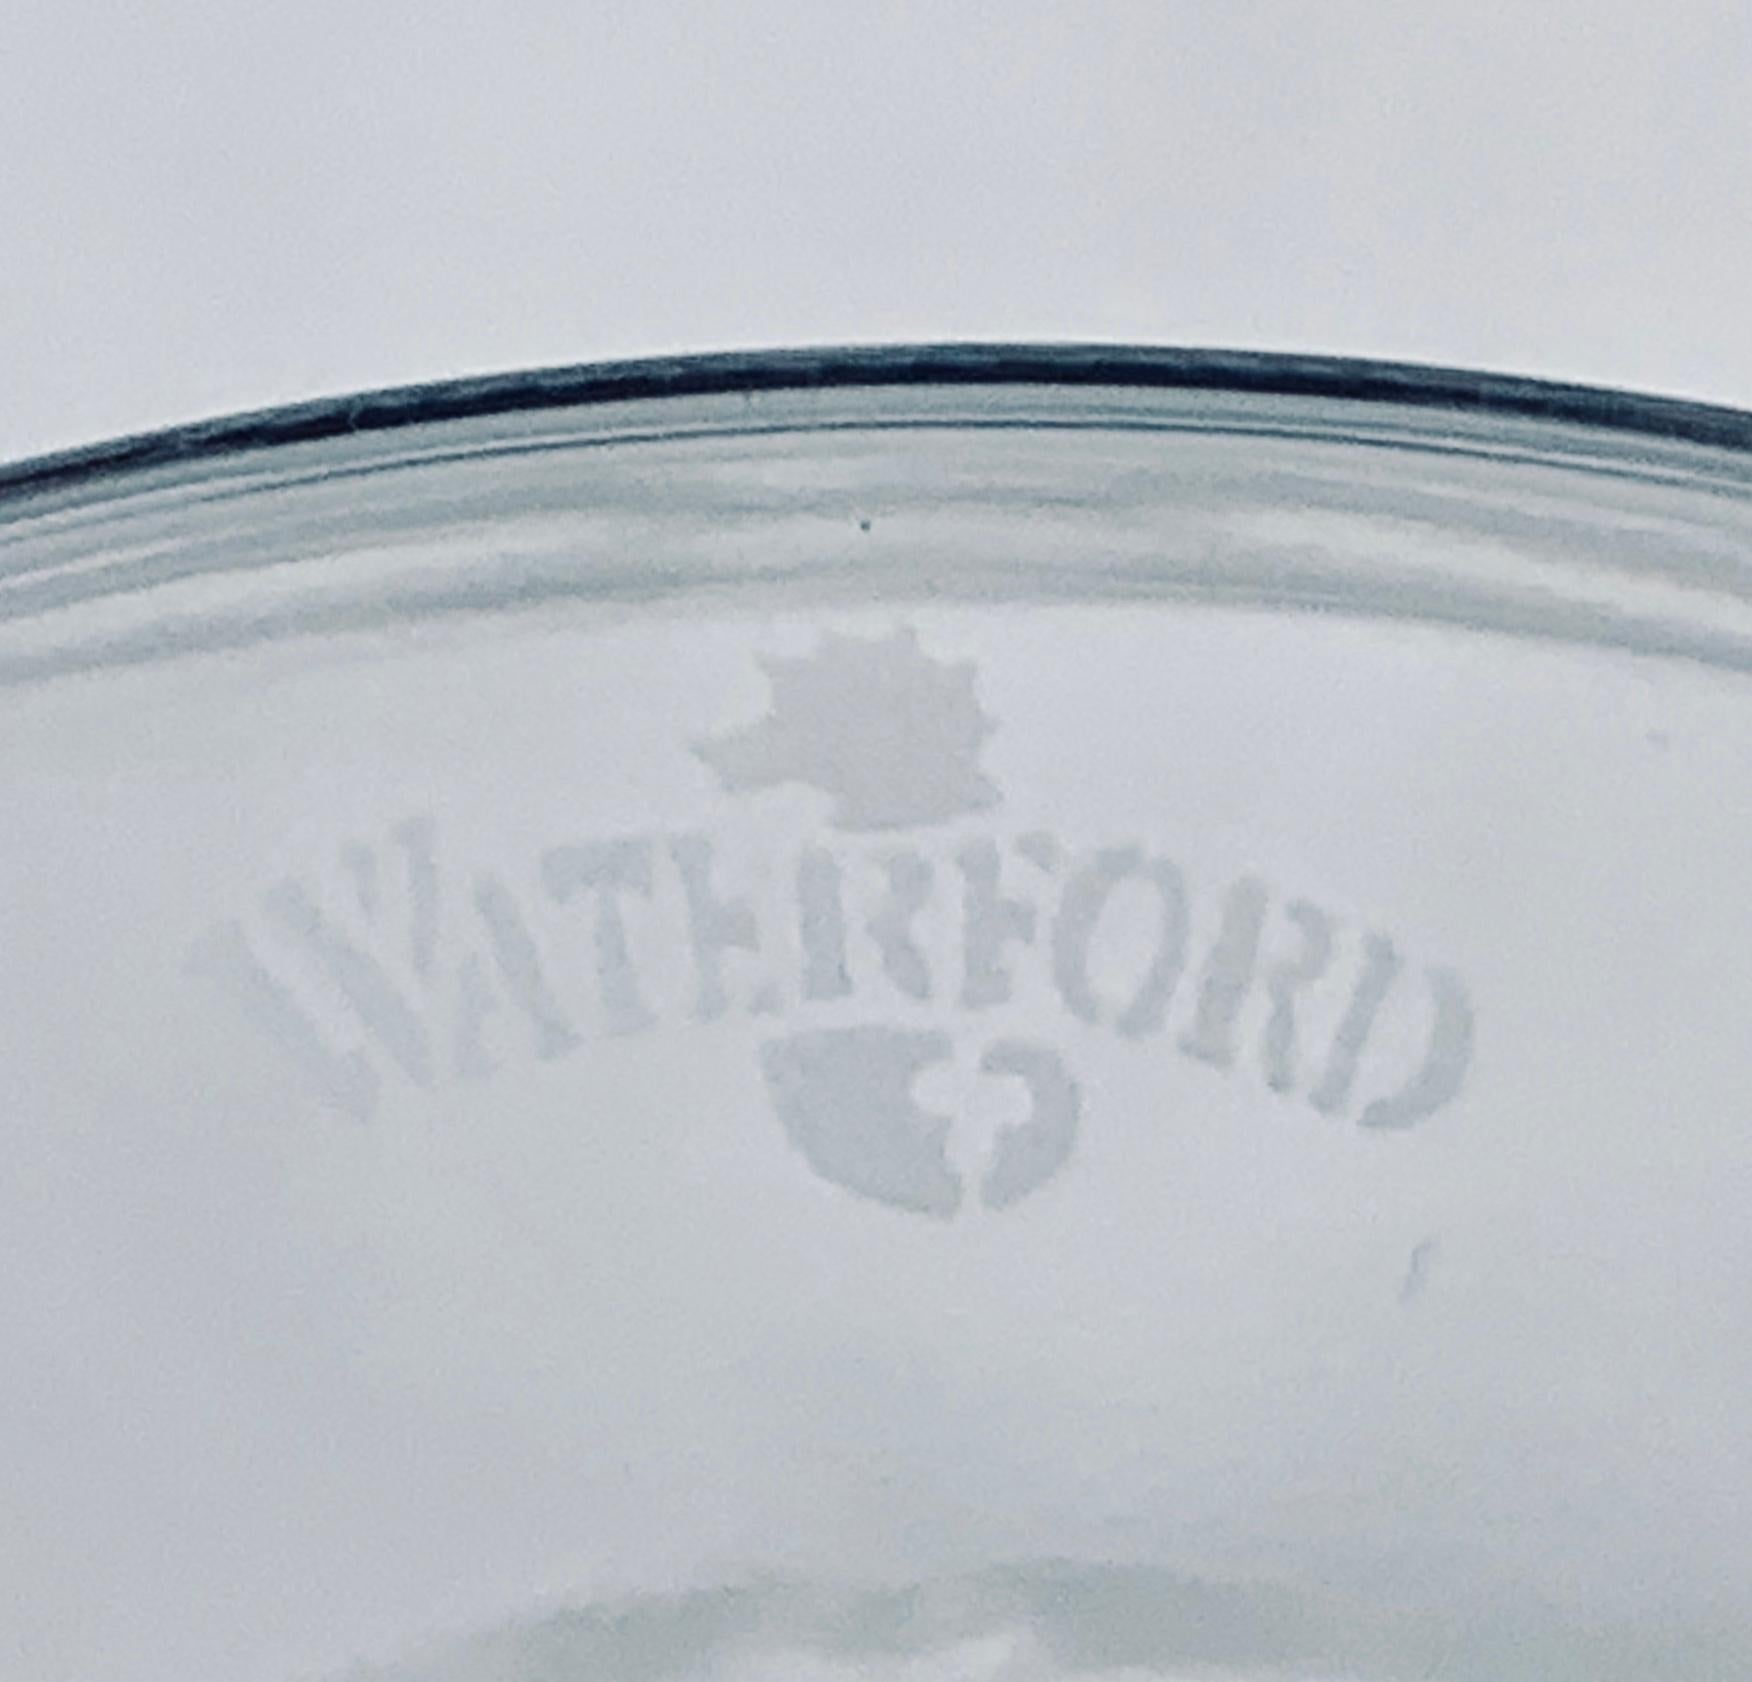 waterford patterns